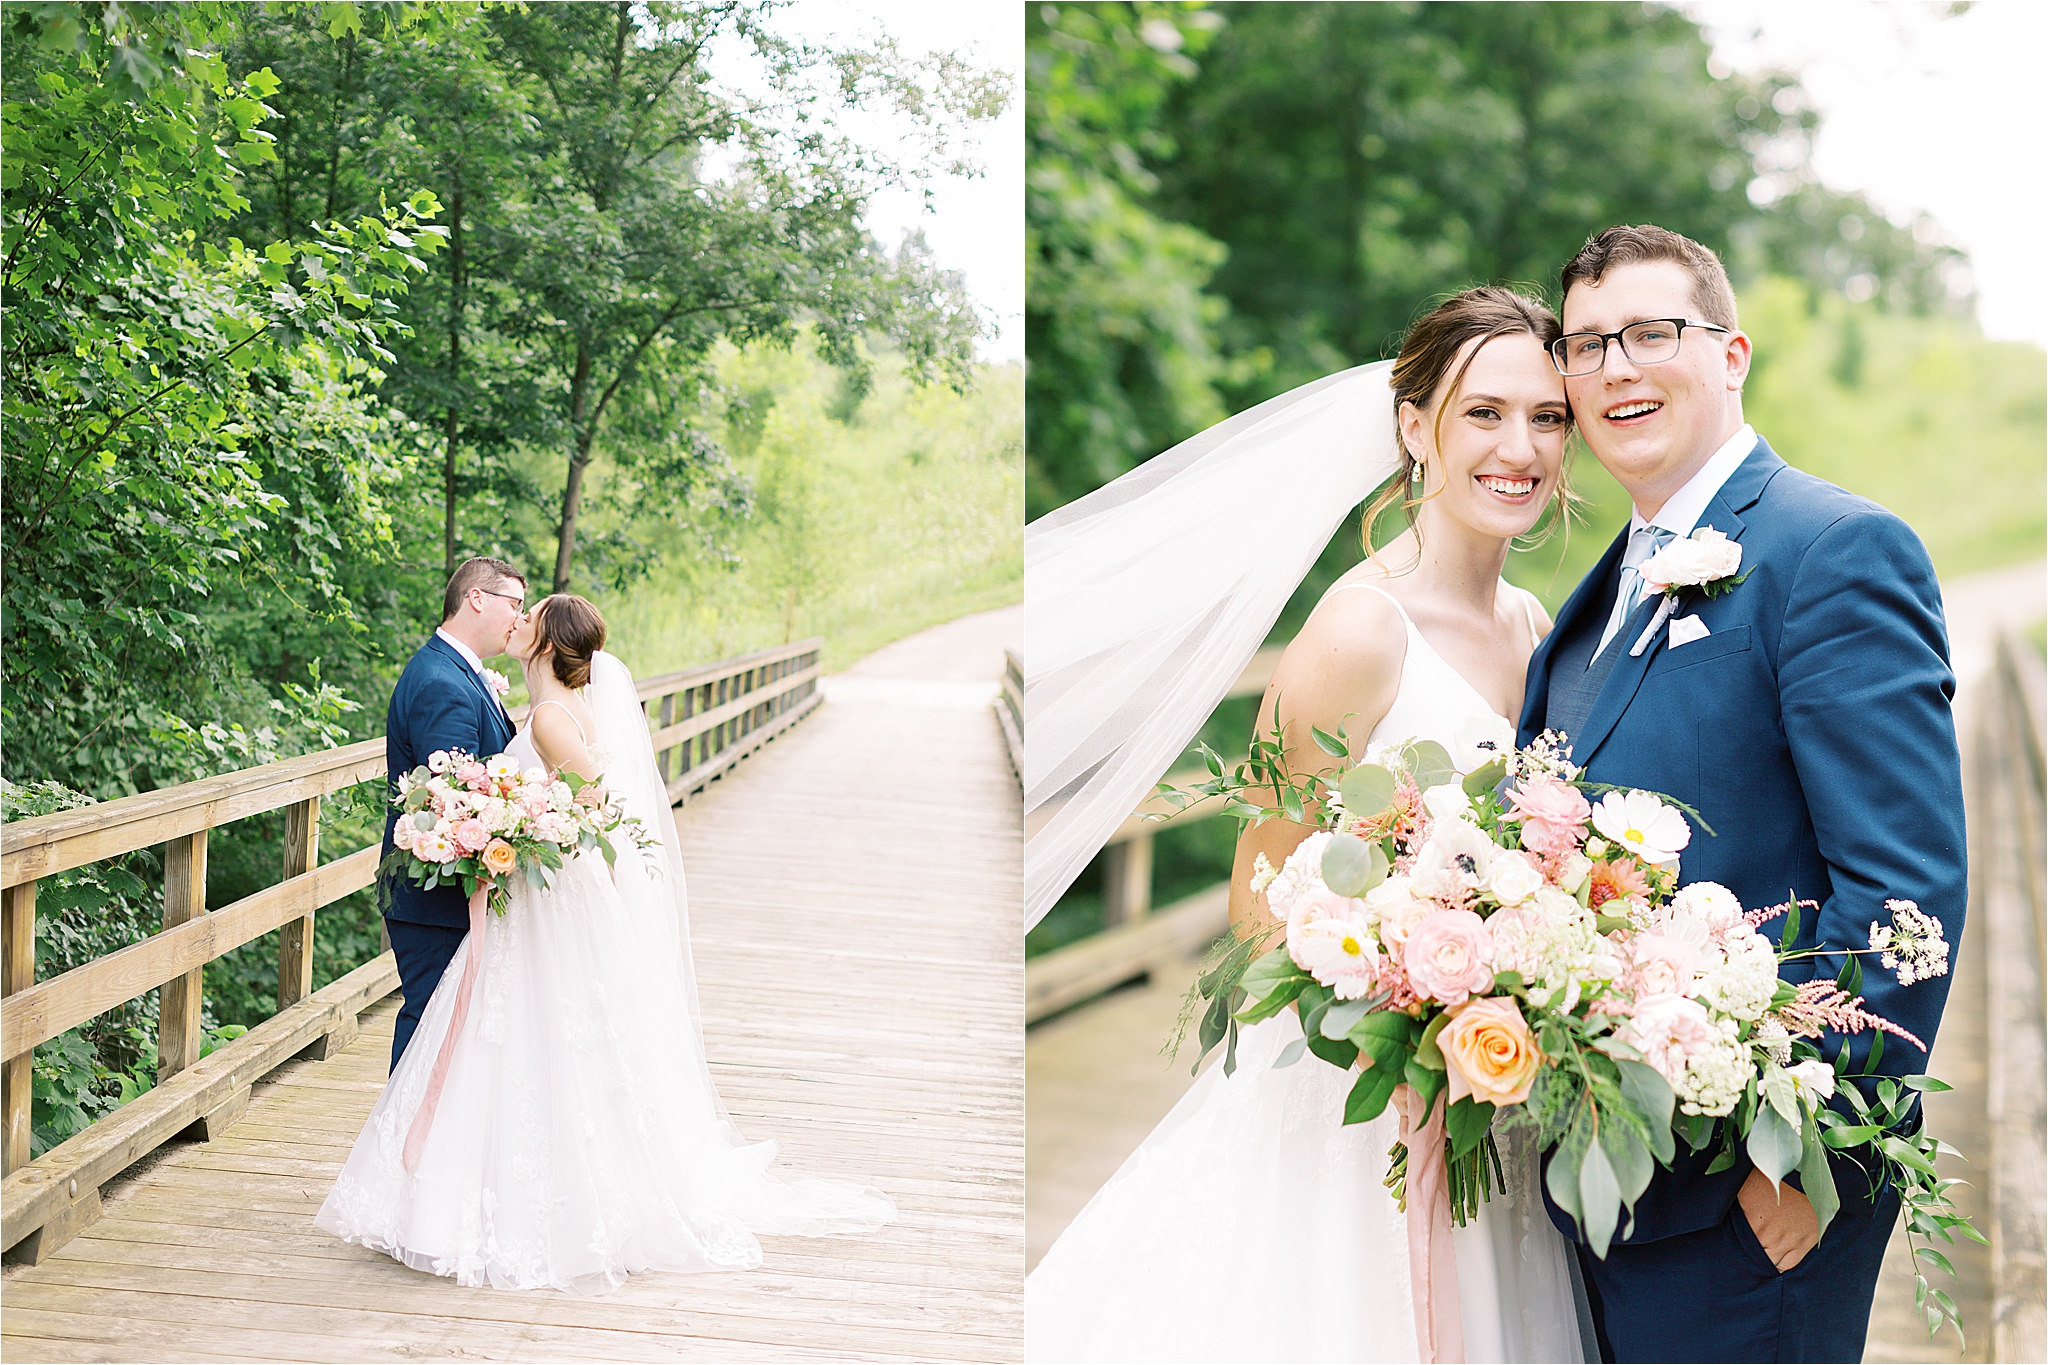 Bride and groom portraits at Blue Heron Brewery & Event Center